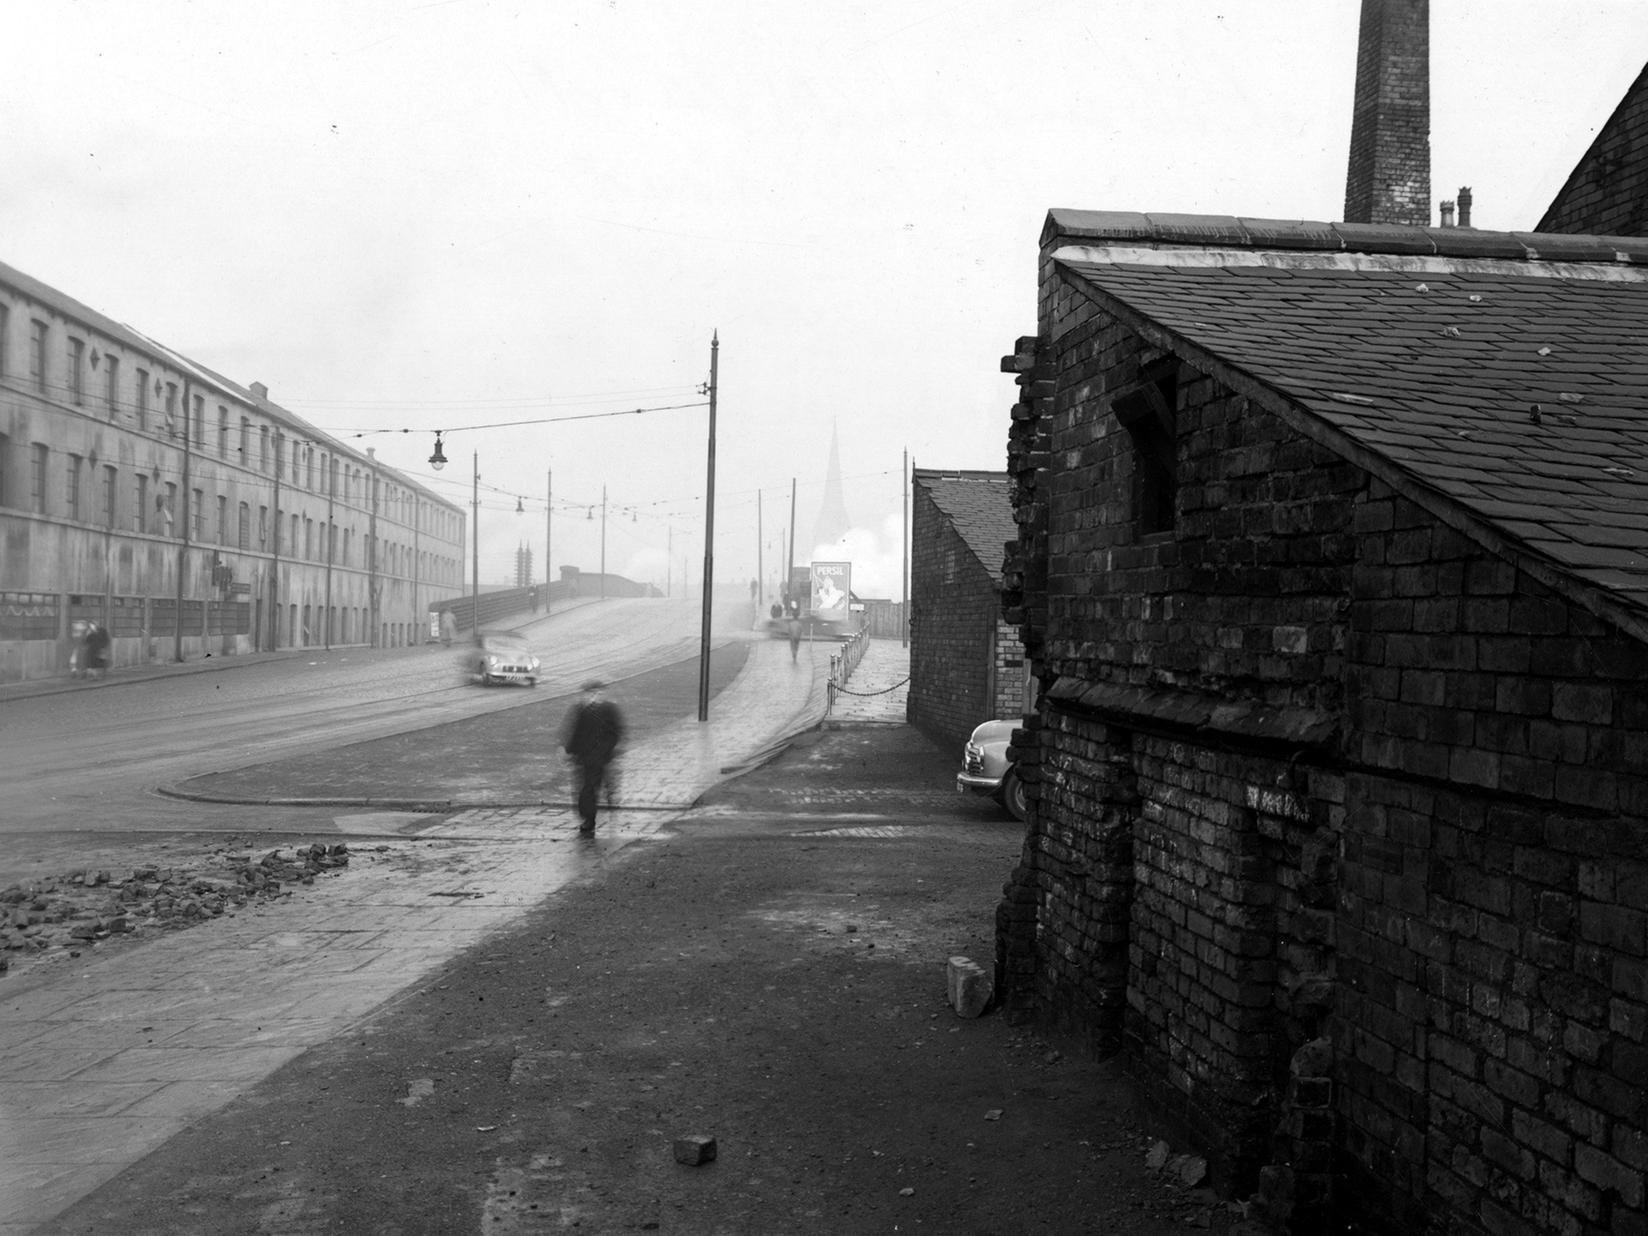 A view looking north down Balm Road in Hunslet from the entrance to Robinson's scrap metal yard.